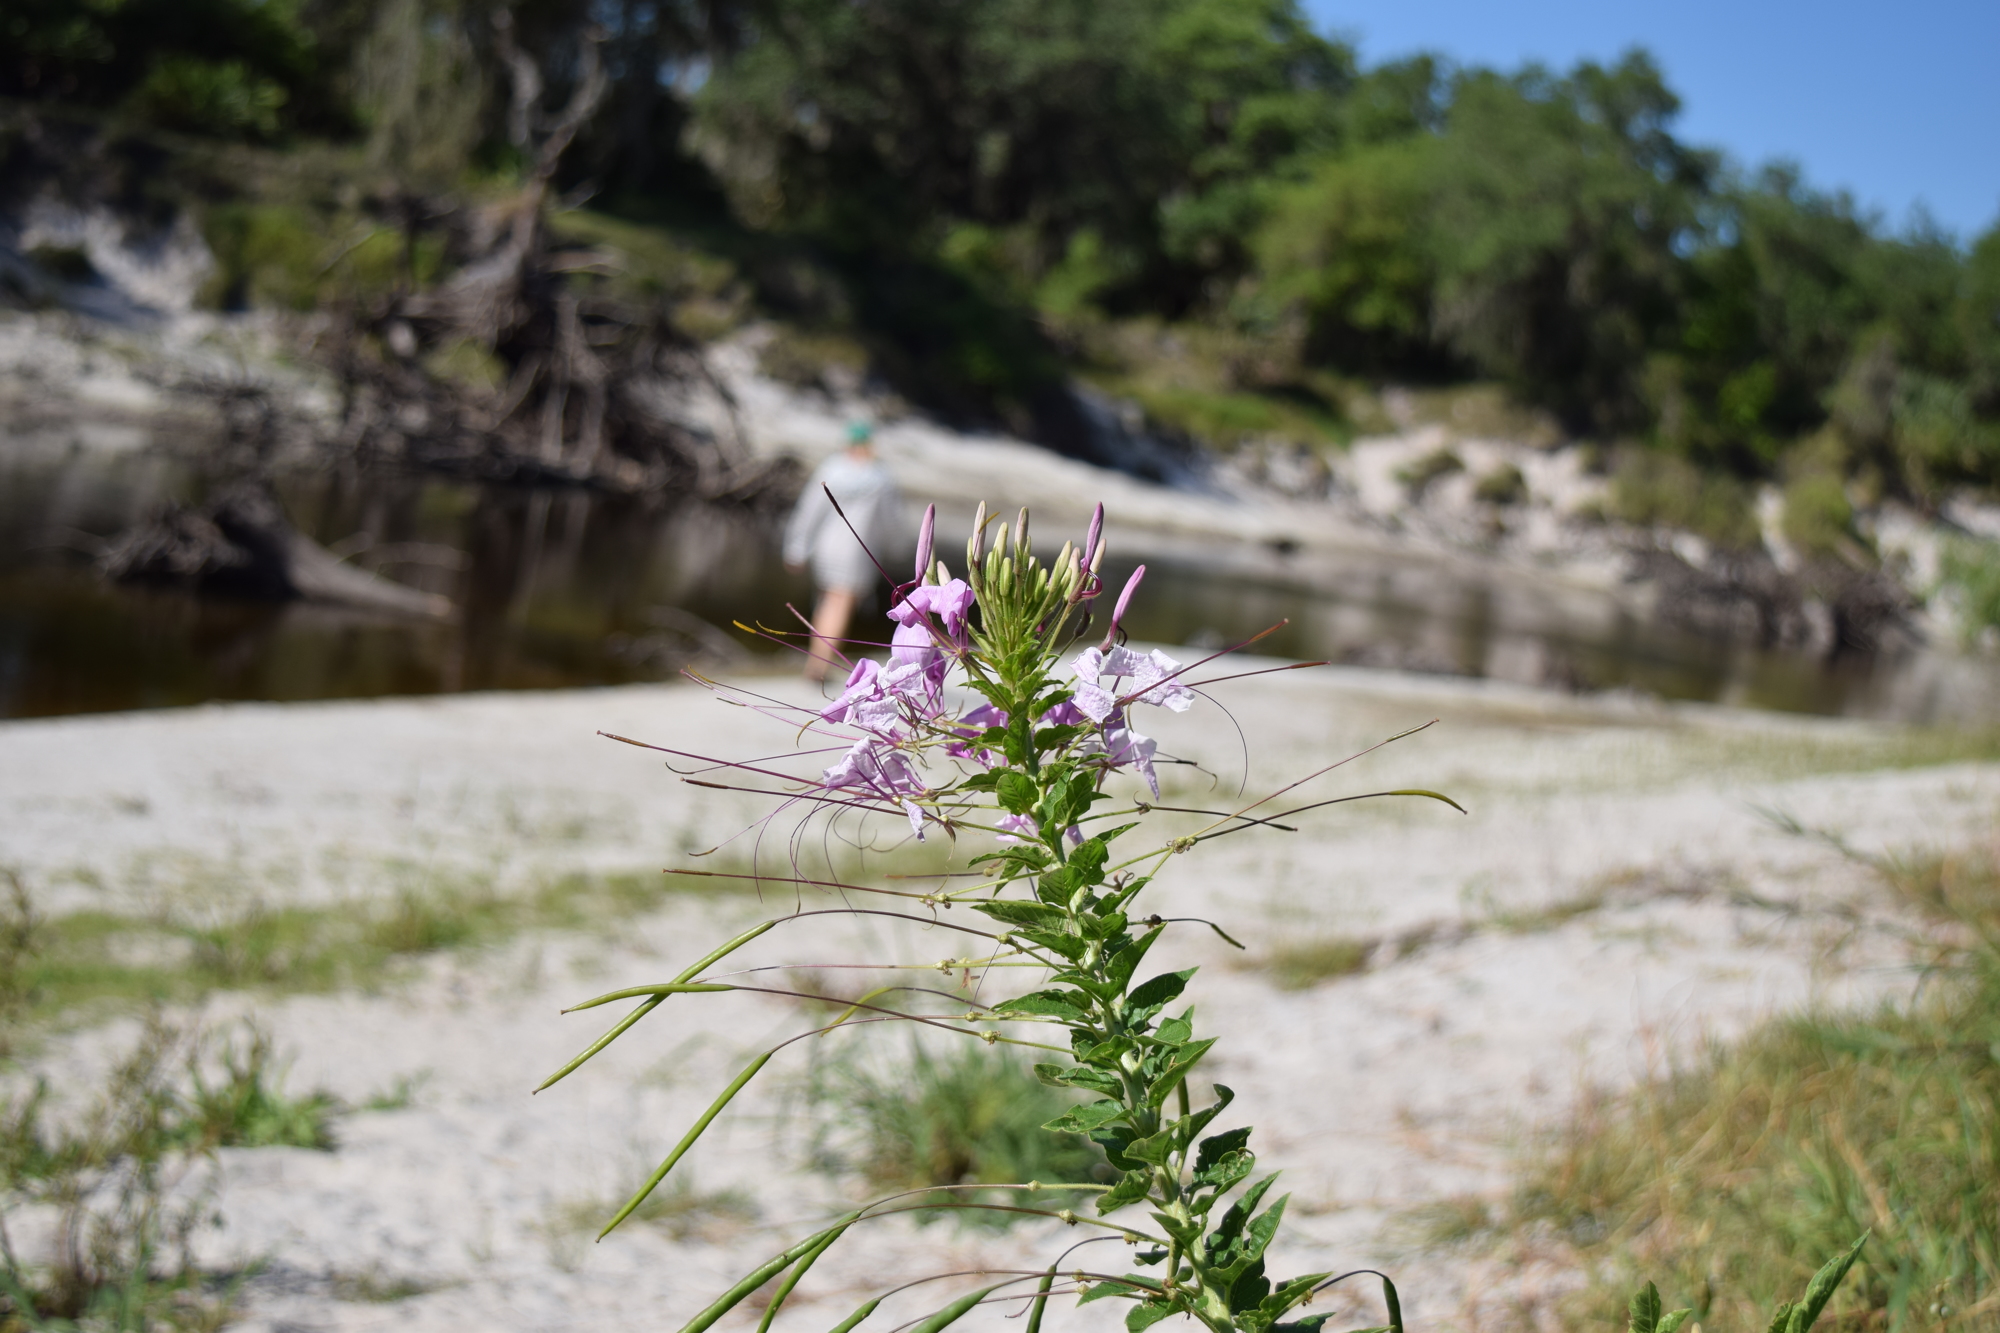 Flowers are a common sighting along the banks of Peace River, home to thousands of species of flora and fauna.